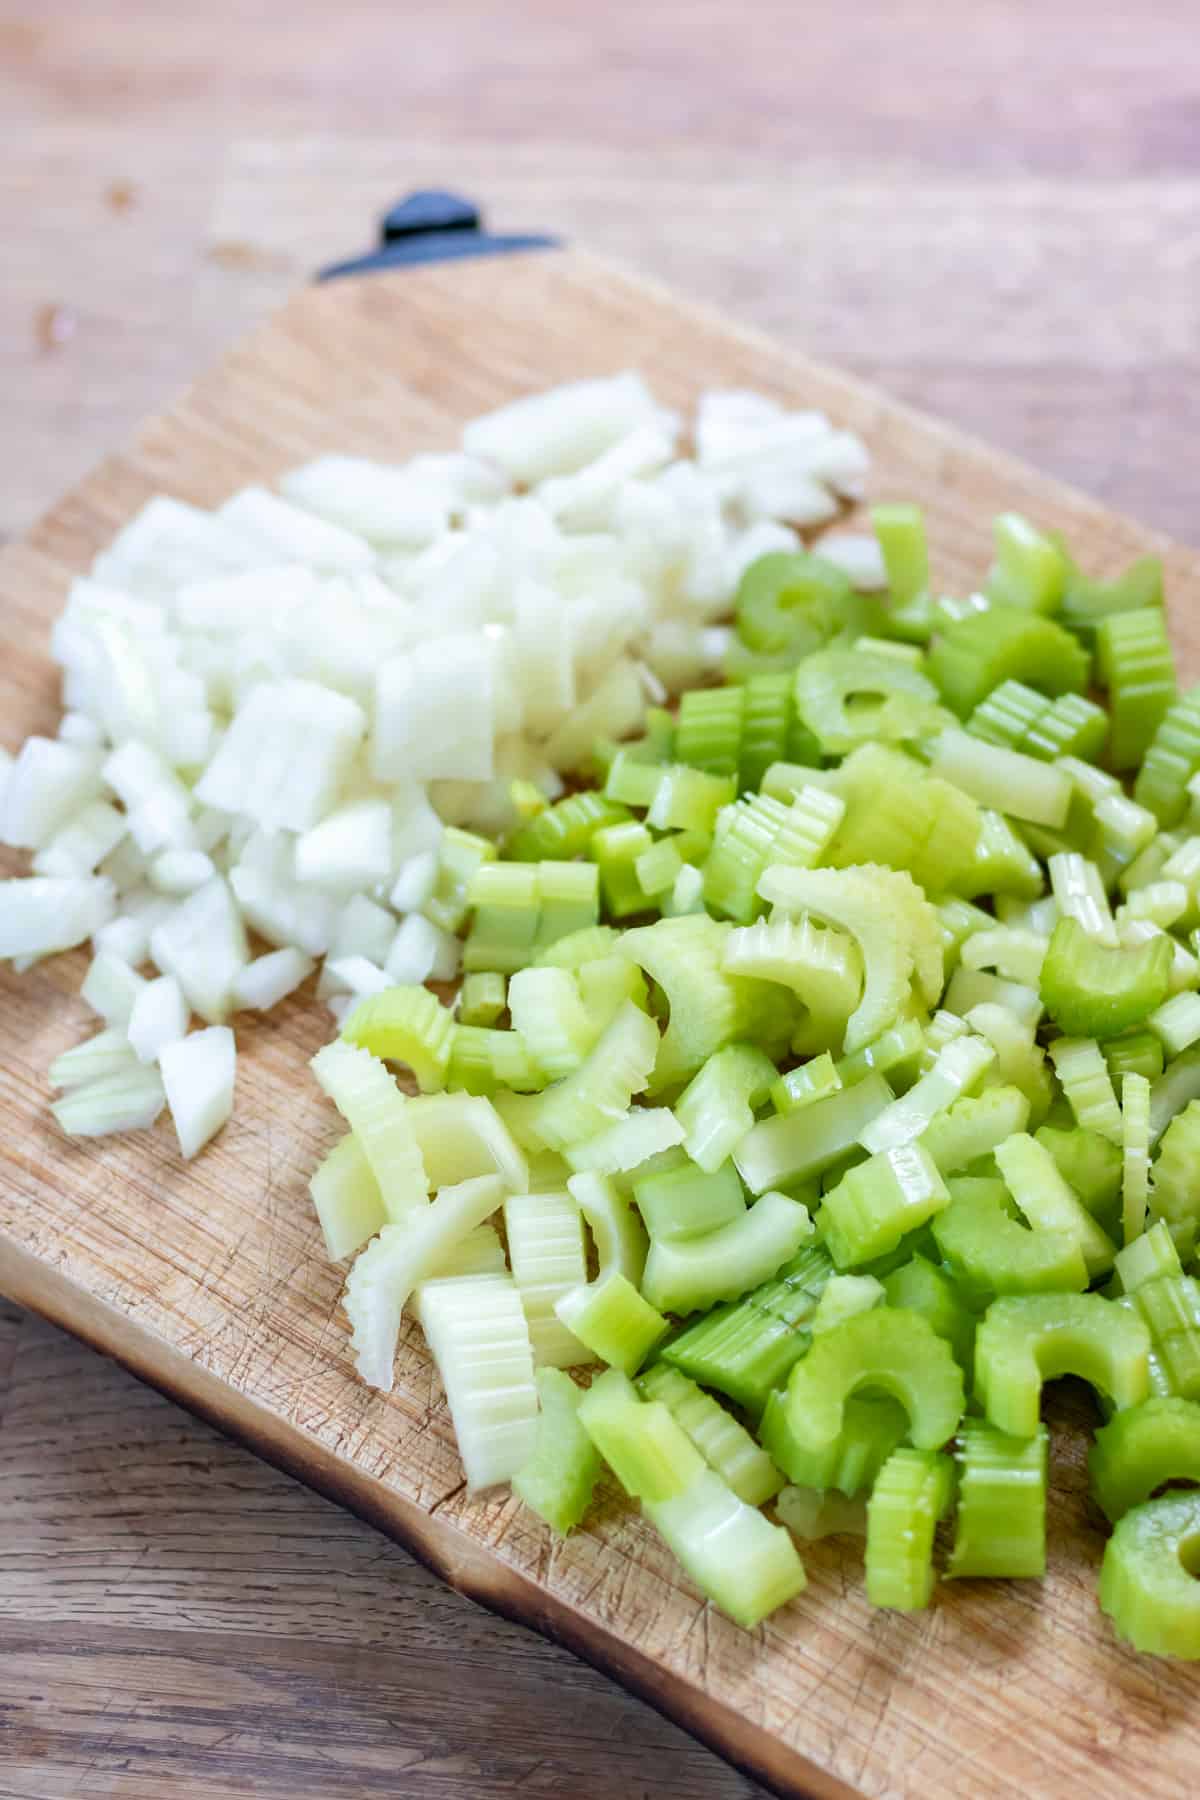 Chopped onion and celery on a wooden board.